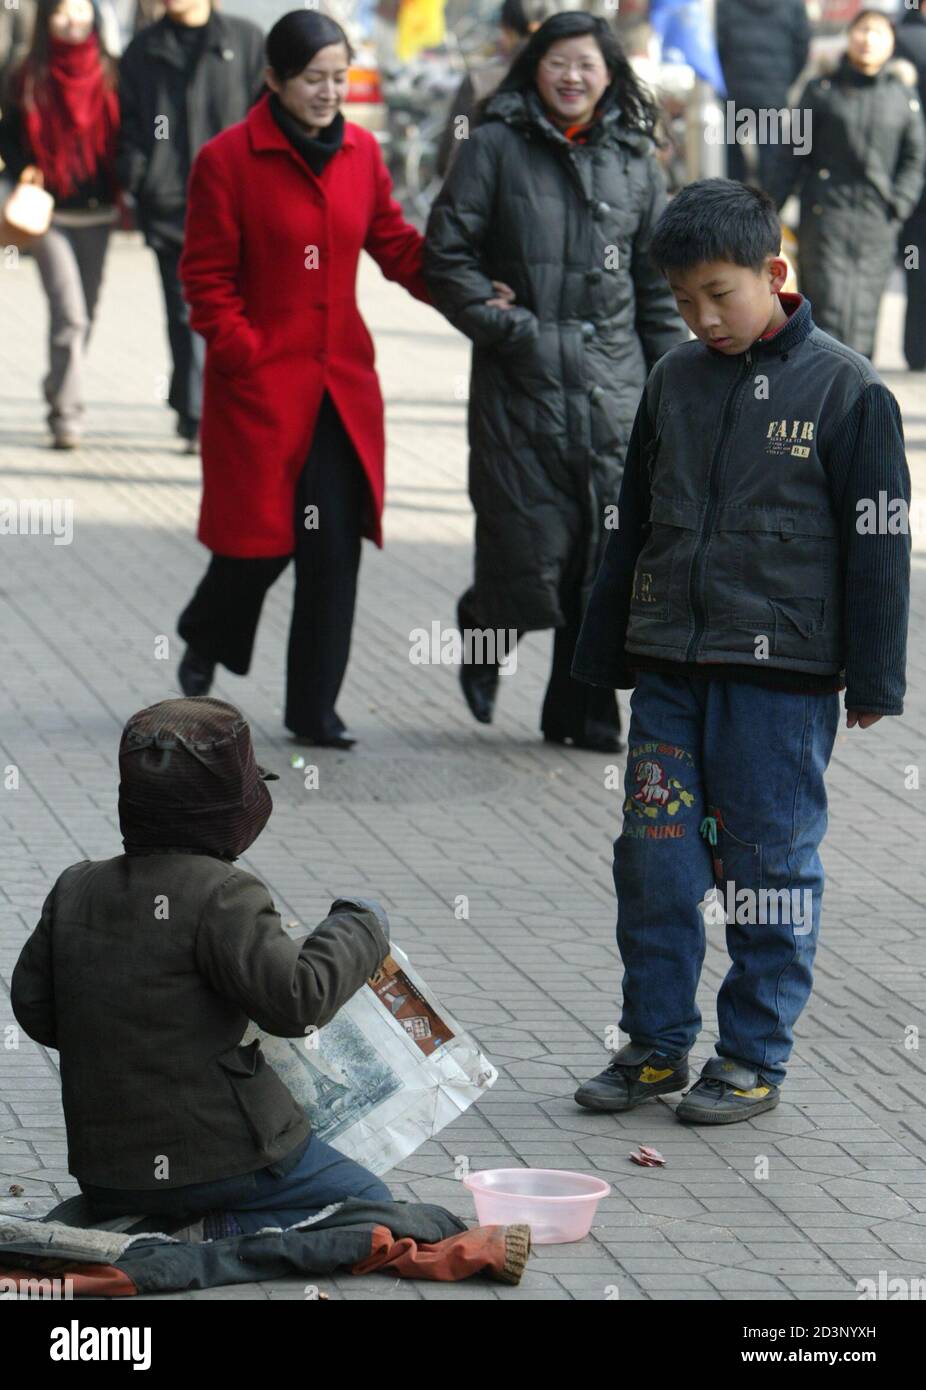 A boy (R) stares at a child begger sitting on the pavement in Taiyuan, the capital of Shanxi Province January 29, 2005. China cut the number of poverty-sticken people by three million in 2004, an official newspaper said this month, as the country grapples with a yawning gap between the rich and the poor. REUTERS/Alfred Cheng Jin  ALF/AA Stock Photo